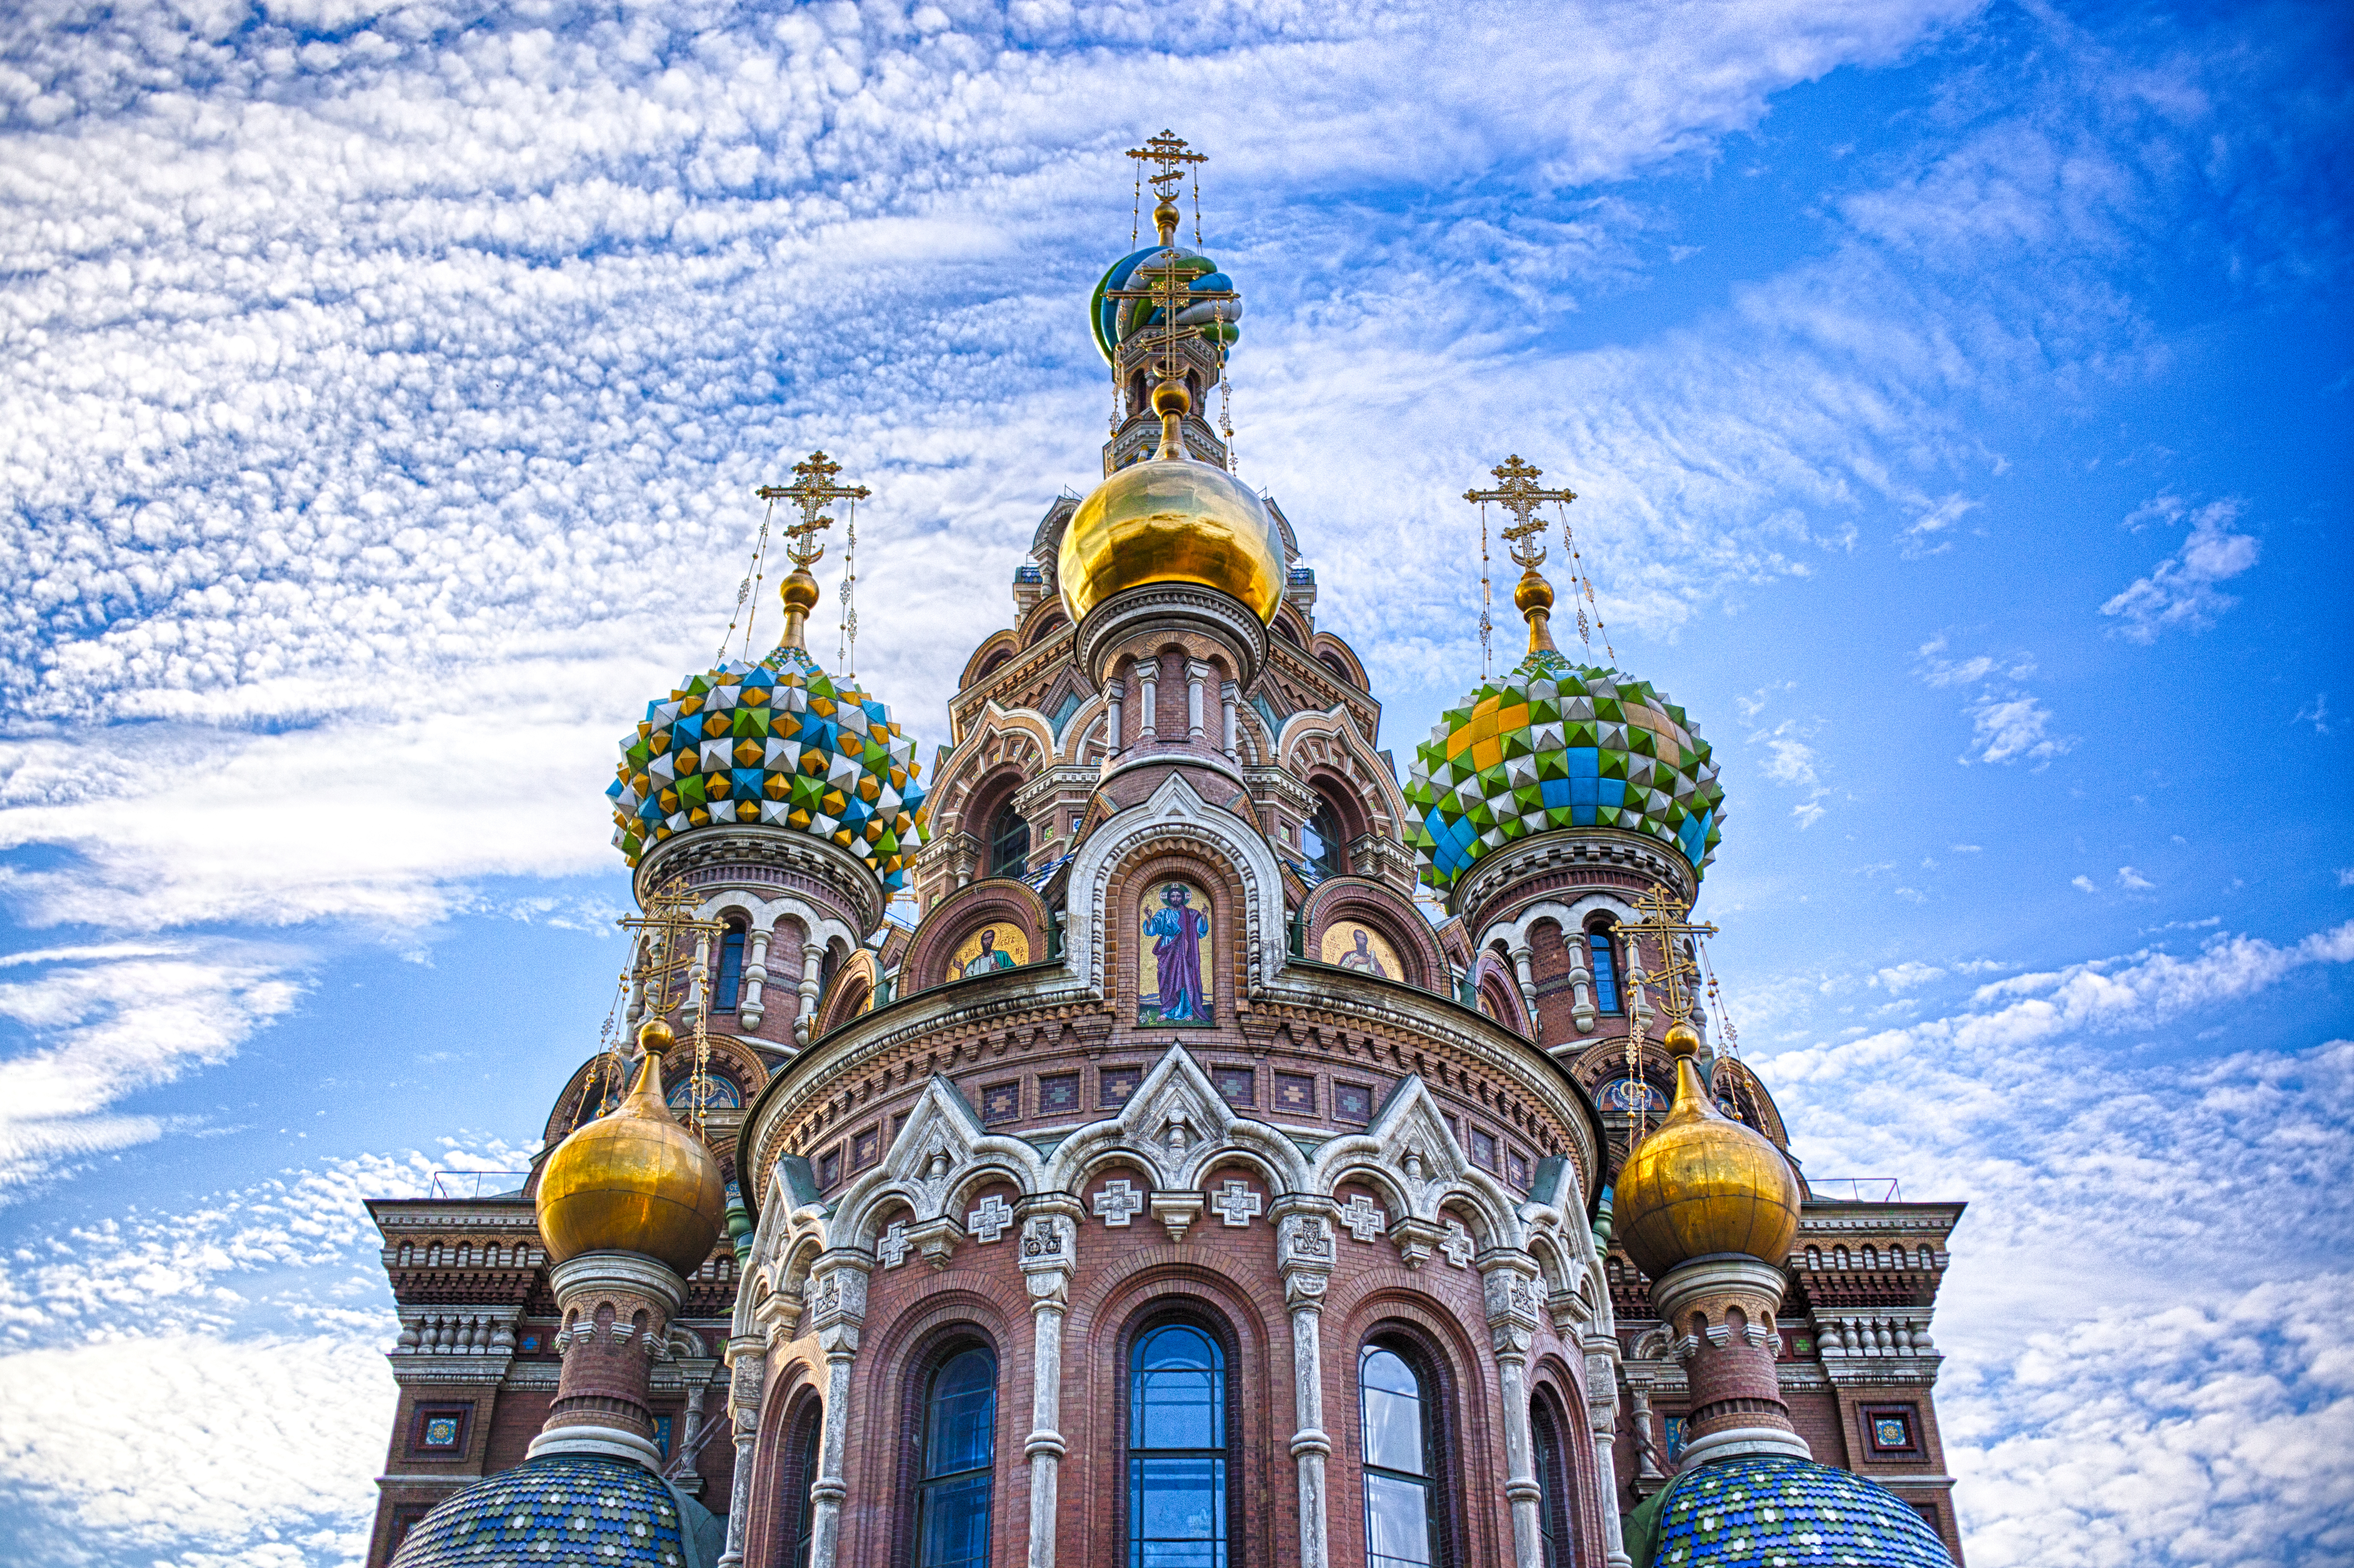 From Russia with Love: Week 1 in St. Petersburg